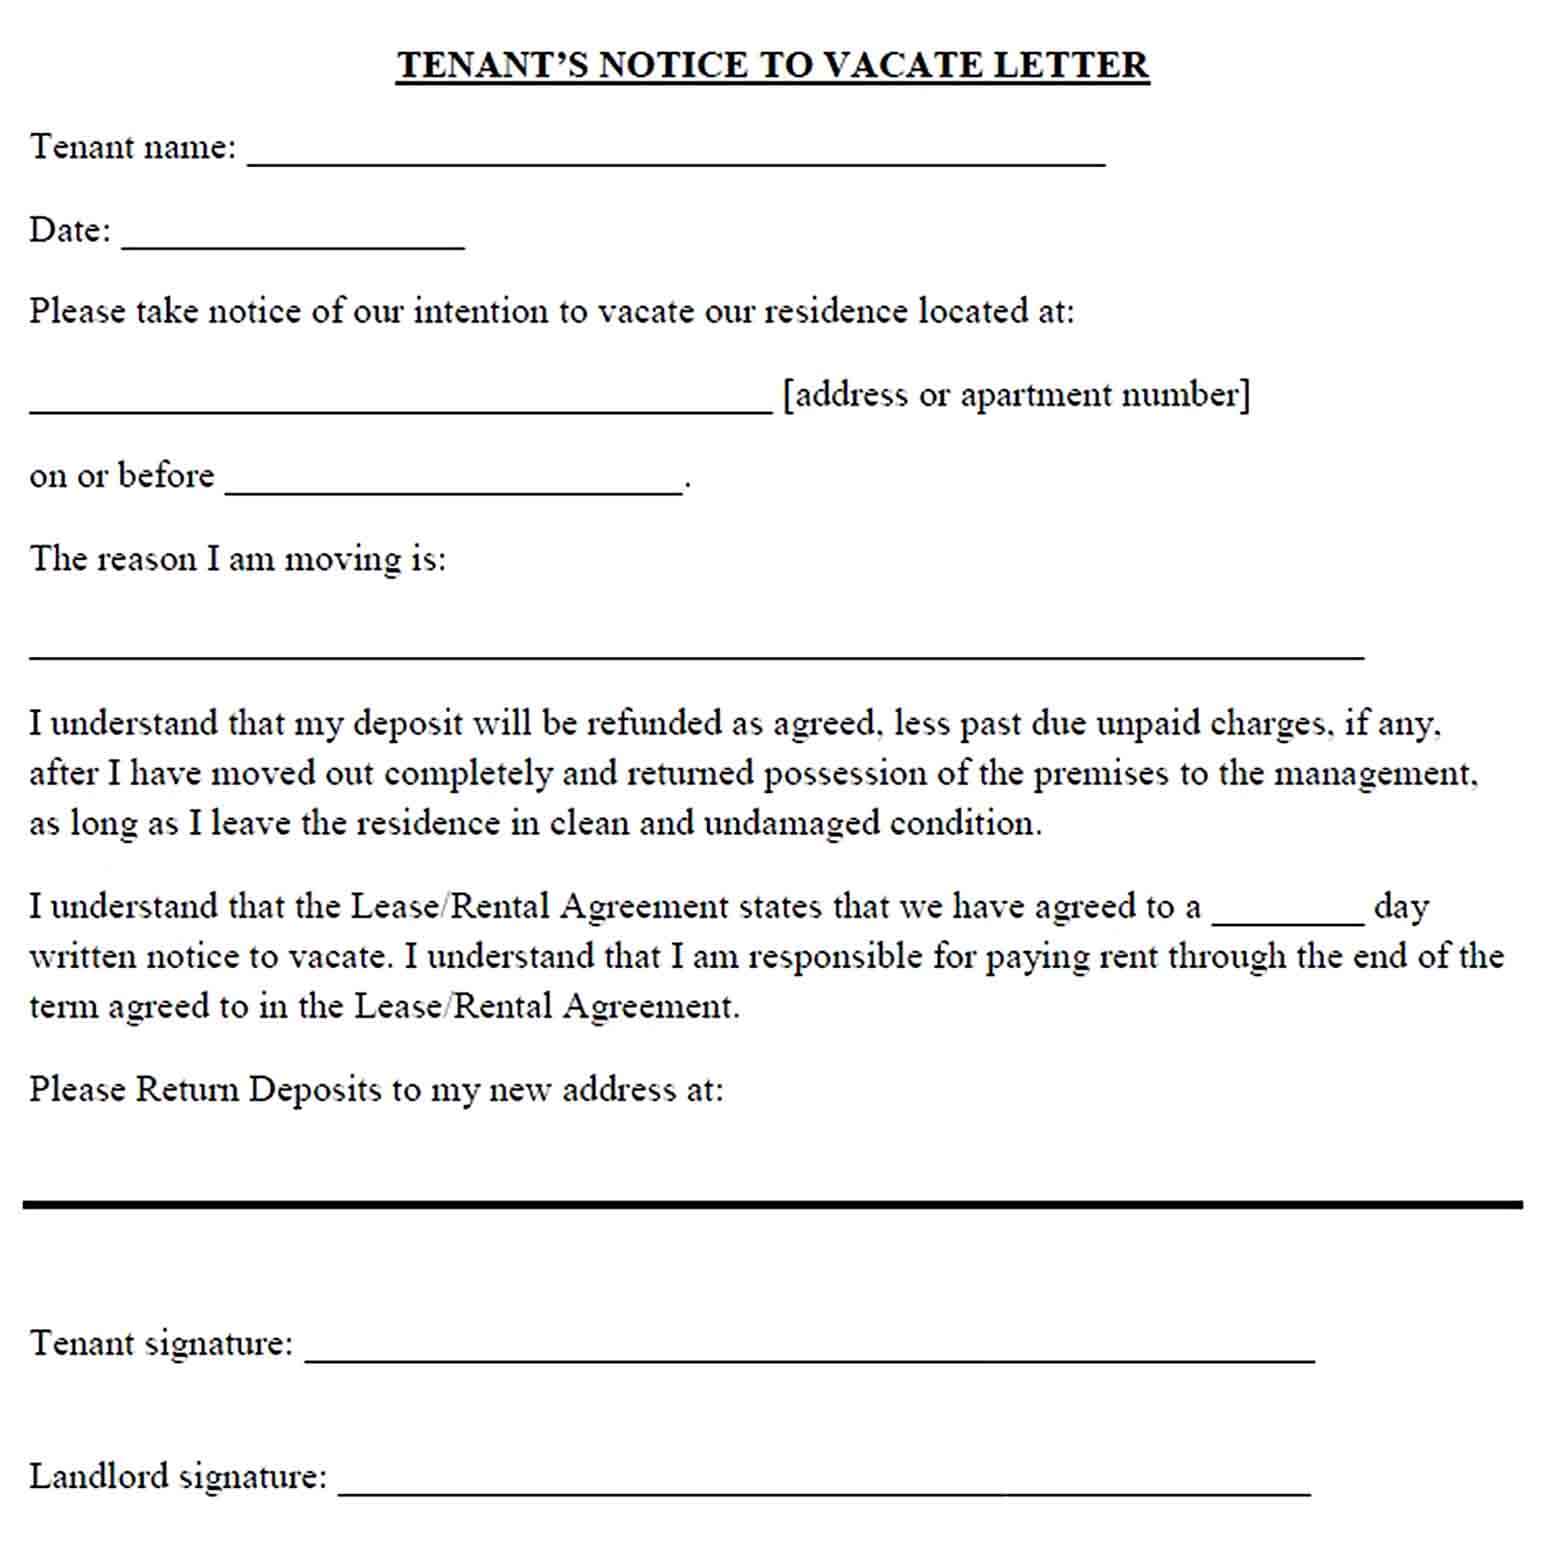 Tenant Notice Vacate Letter